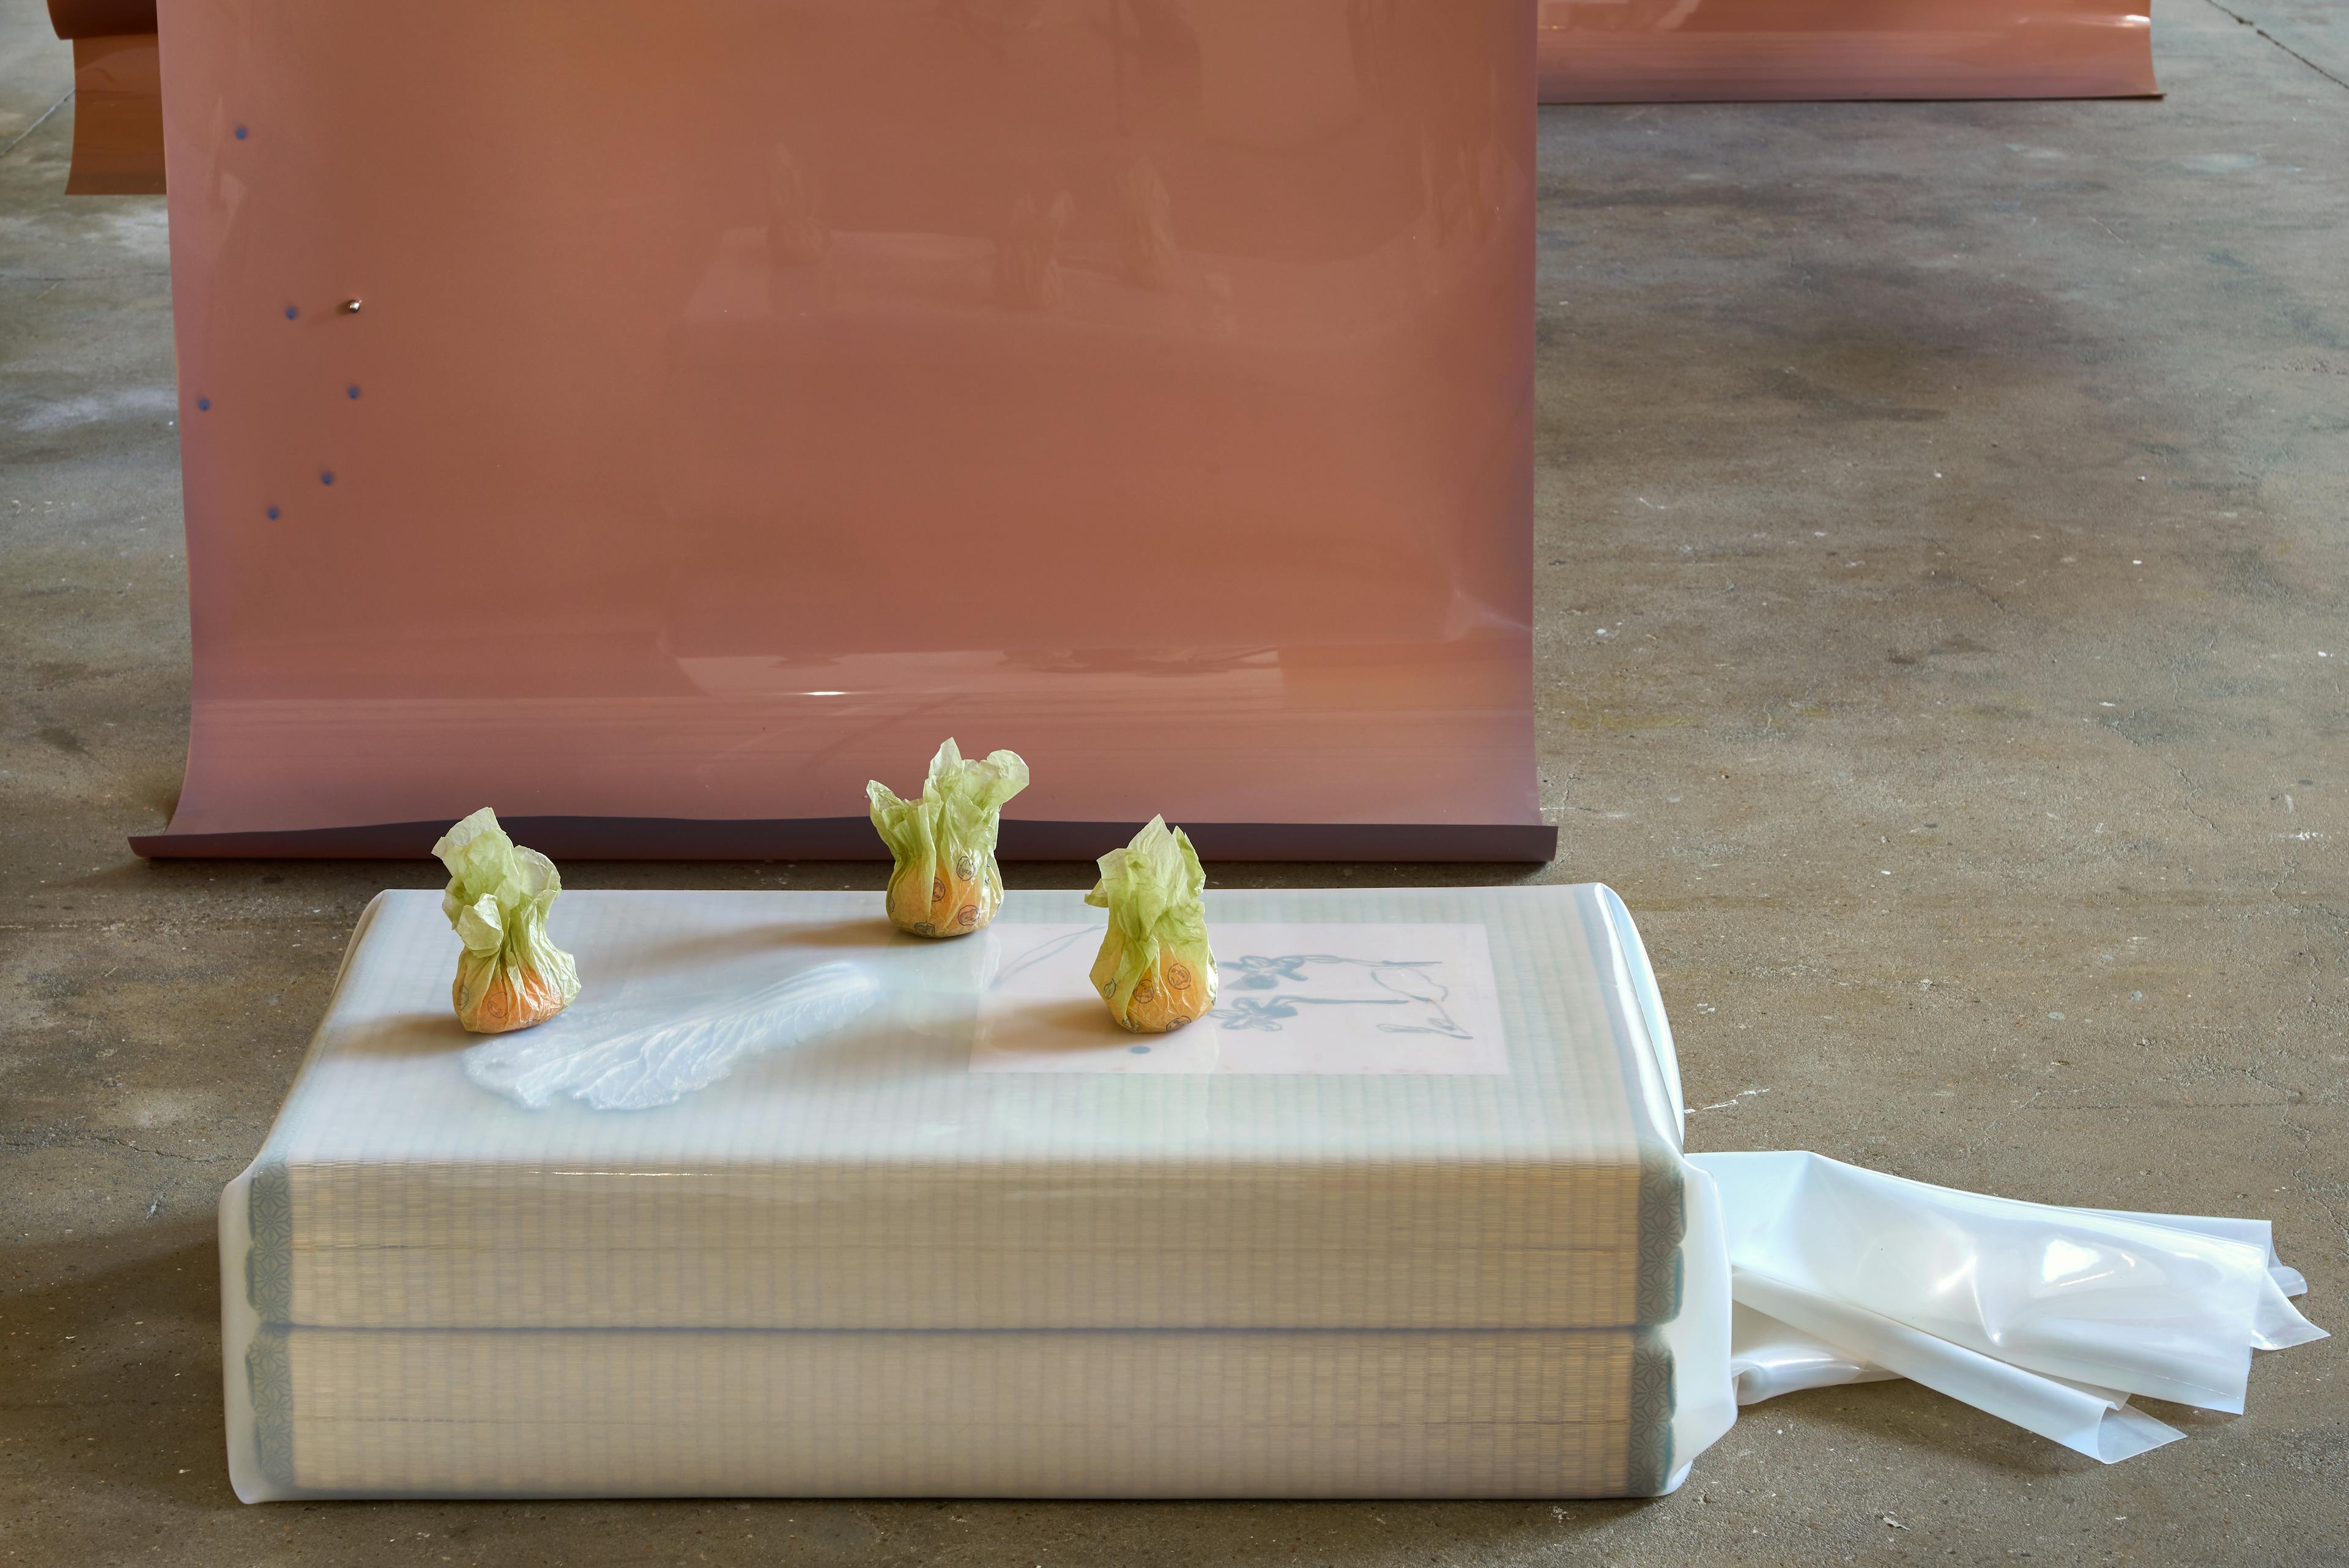 Three fruit wrapped in green tissue sit on folded tatami mats wrapped in translucent plastic, on a concrete floor in front of suspended film sheets that curl as they touch the ground.